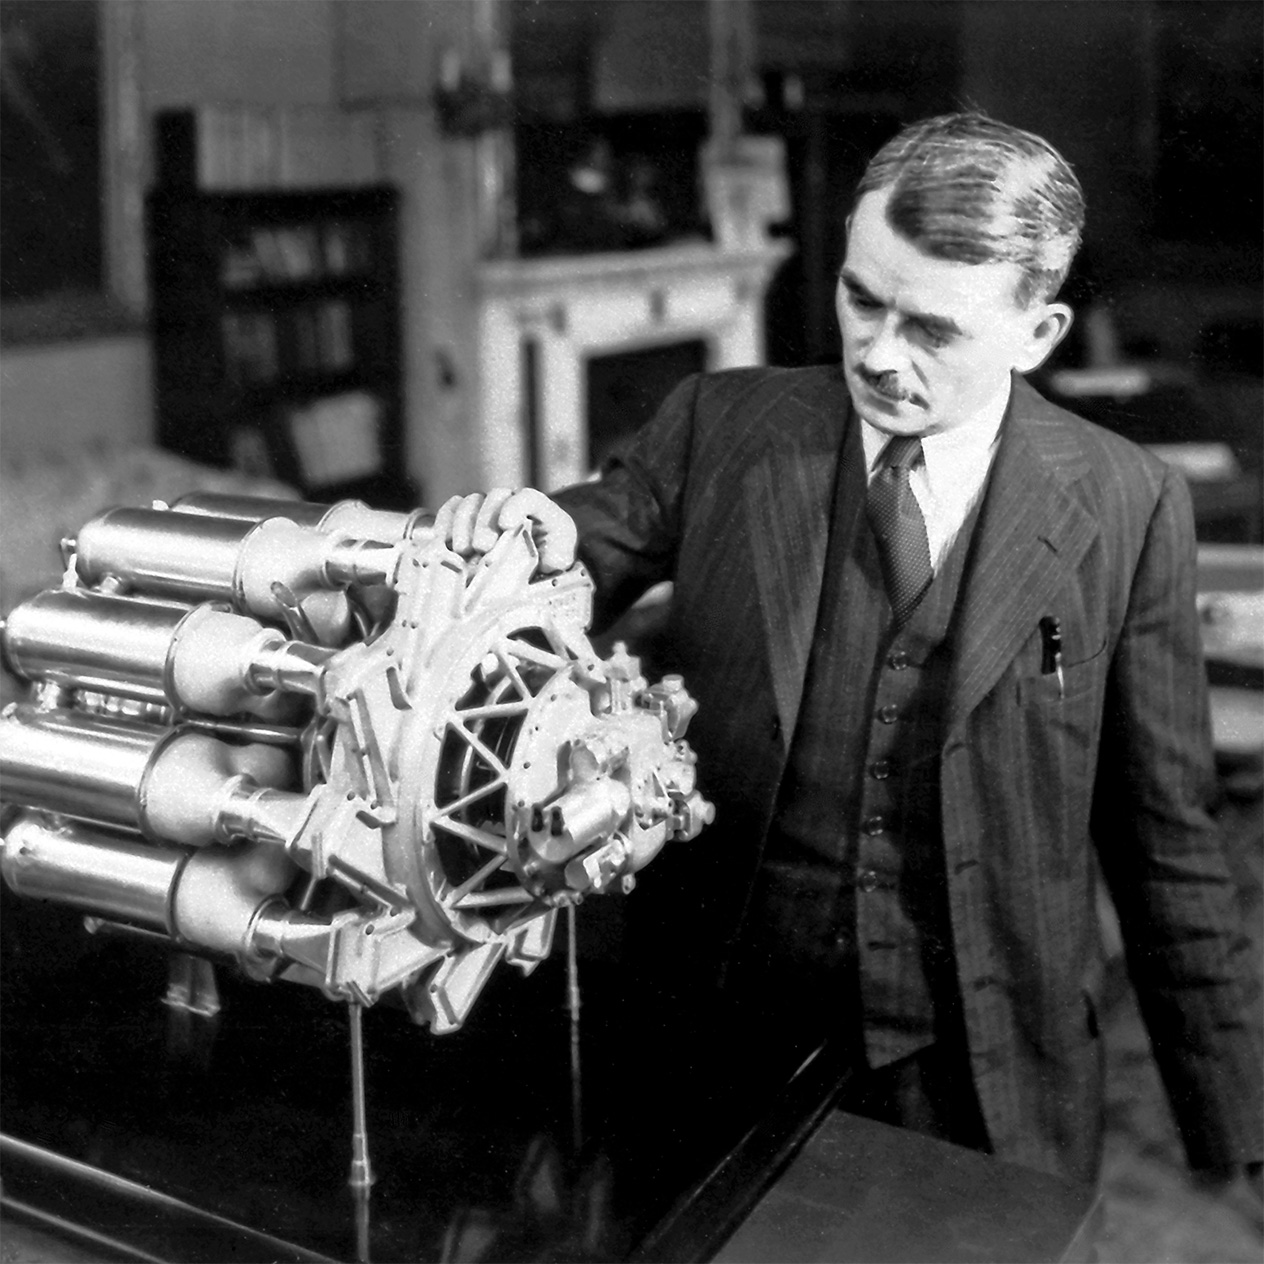 Image of Frank Whittle with his engine